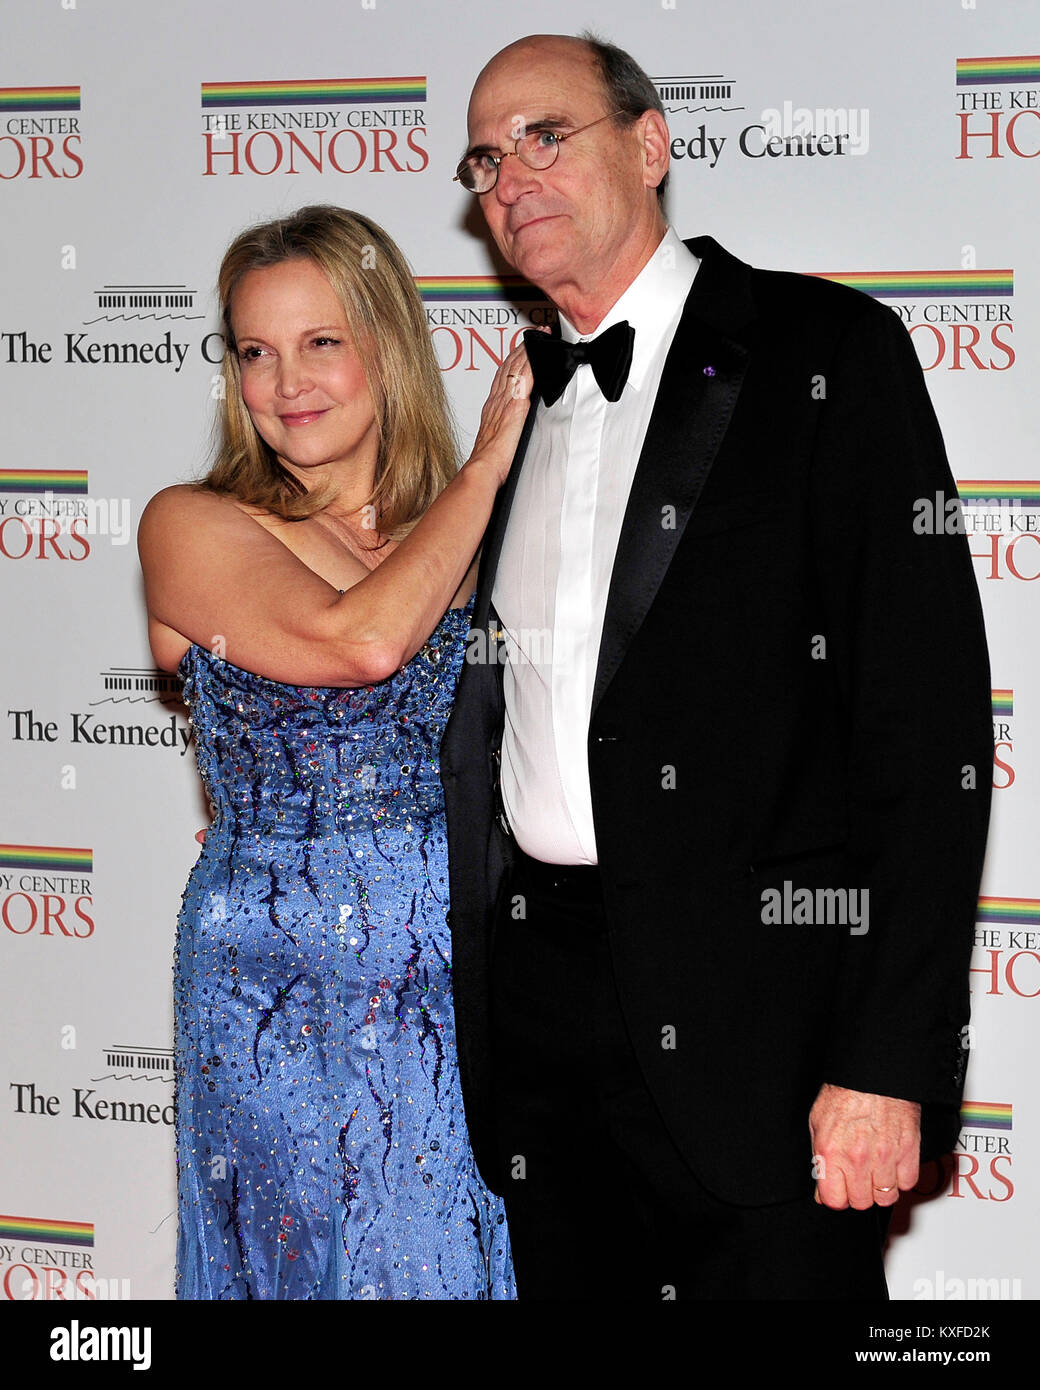 James Taylor and his wife, Caroline 'Kim' Smedvig, arrive for the formal Artist's Dinner honoring the recipients of the 2011 Kennedy Center Honors hosted by United States Secretary of State Hillary Rodham Clinton at the U.S. Department of State in Washington, D.C. on Saturday, December 3, 2011. The 2011 honorees are actress Meryl Streep, singer Neil Diamond, actress Barbara Cook, musician Yo-Yo Ma, and musician Sonny Rollins..Credit: Ron Sachs / CNP /MediaPunch Stock Photo